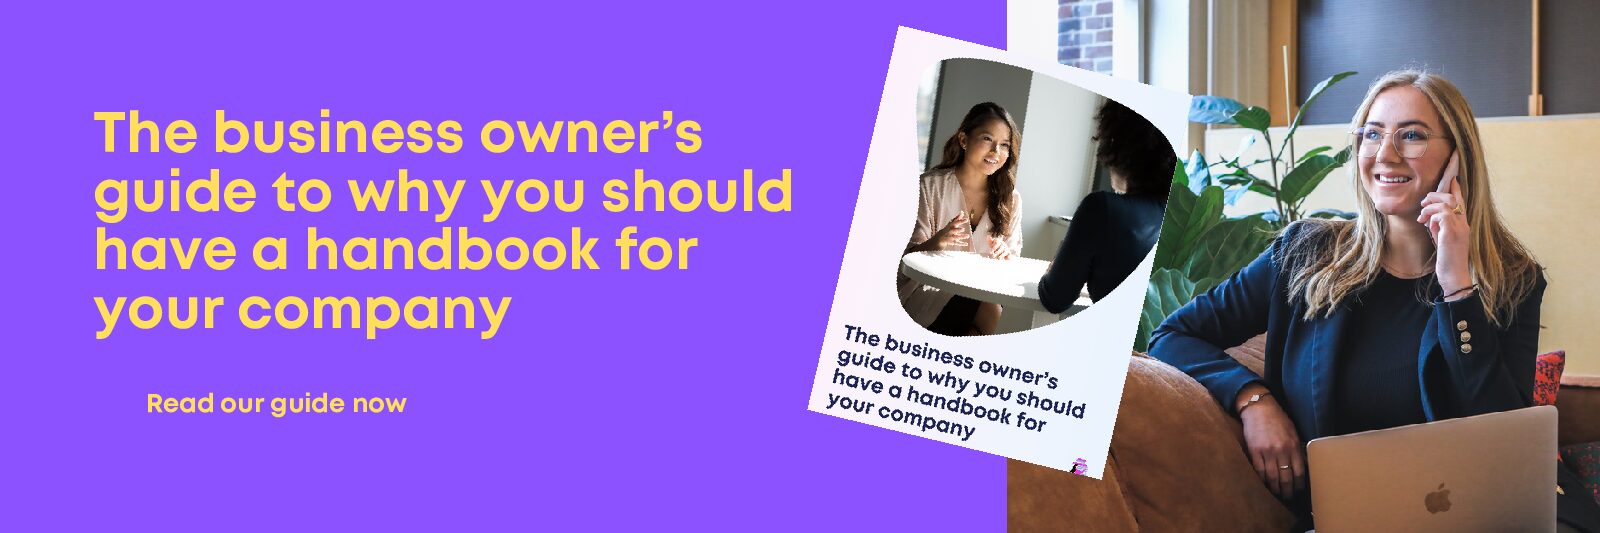 The business owner’s guide to why you should have a handbook for your company